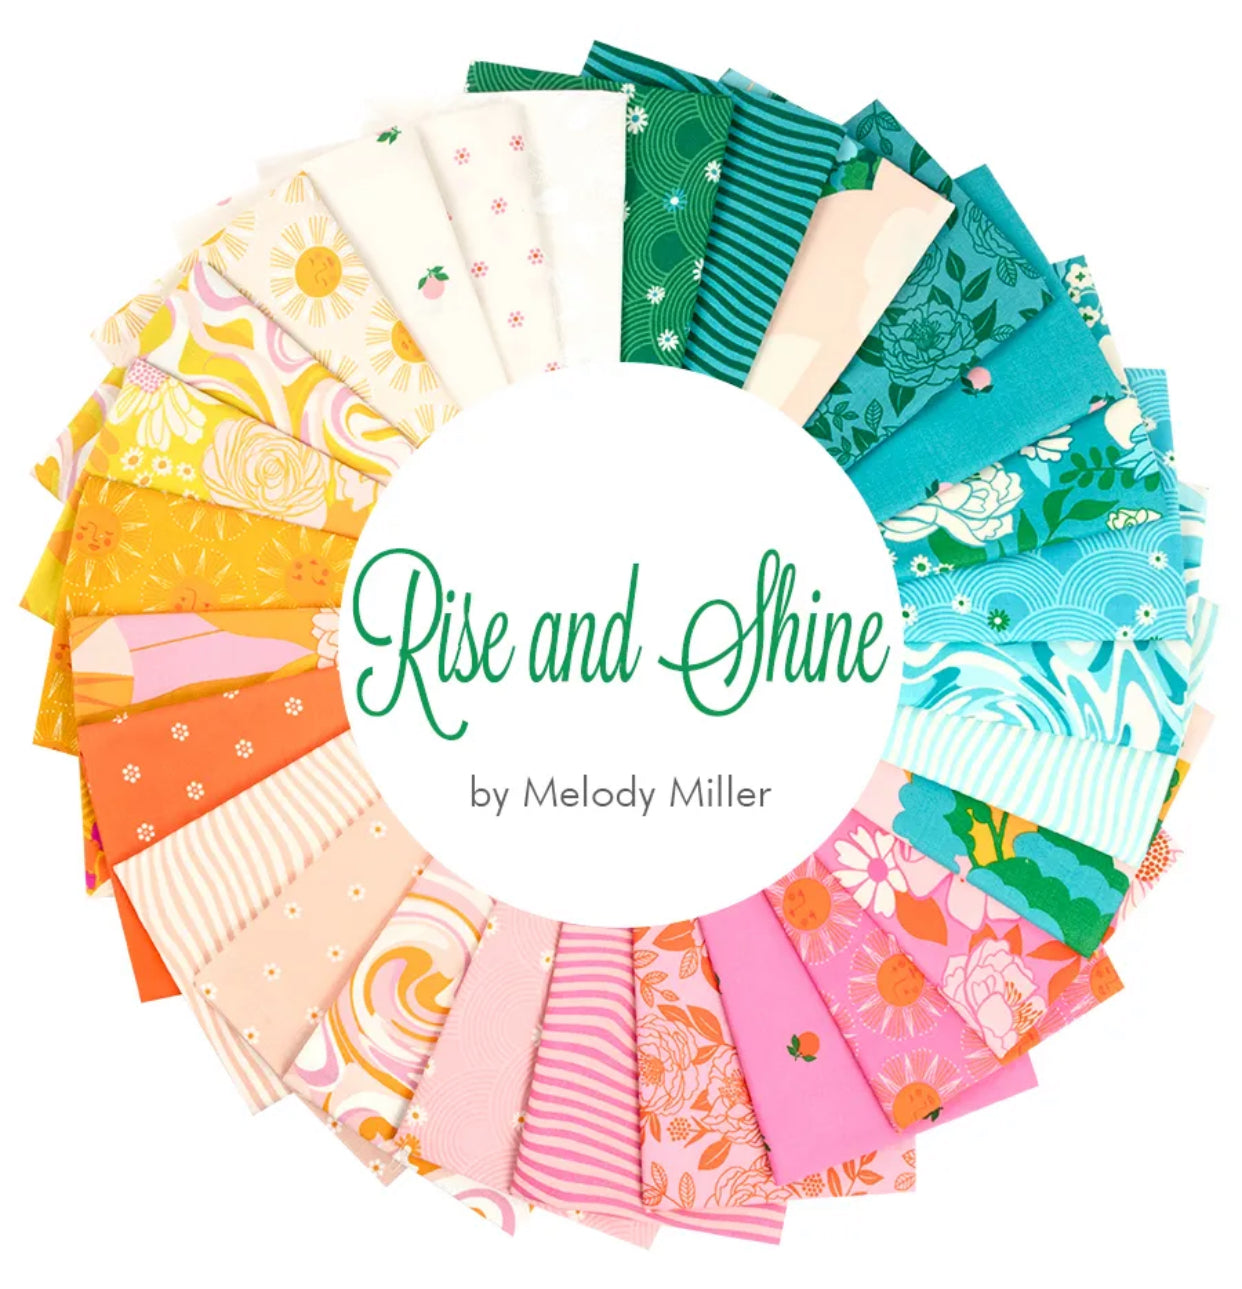 Rise and Shine Fat Quarter Bundle
Melody Miller for Ruby Star Society